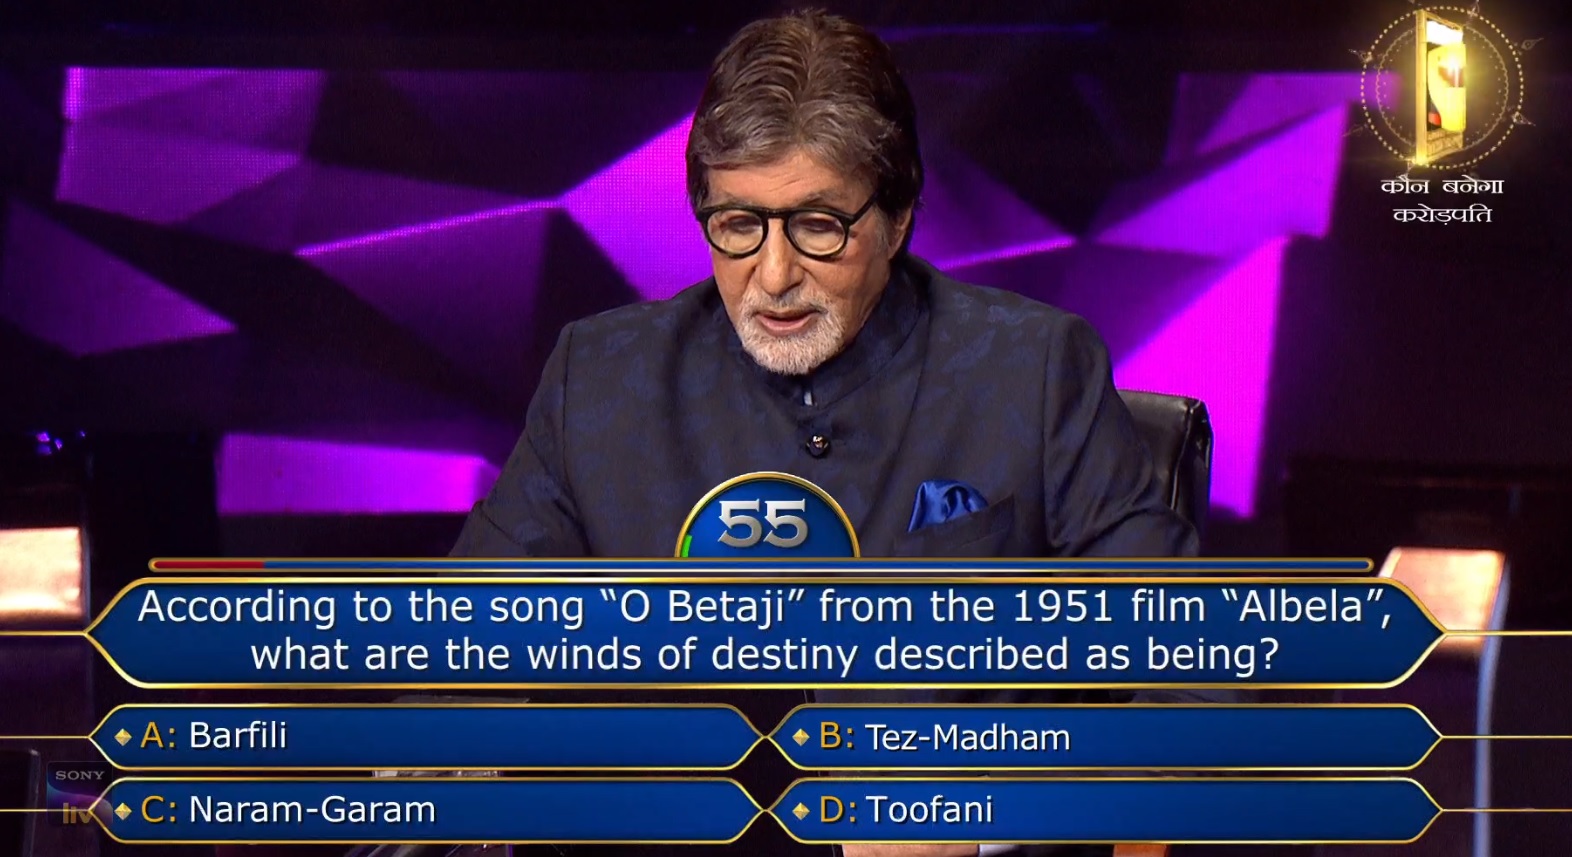 Ques : According to the song “O Betaji” from the 1951 film “Albela”, what are the winds of destiny described as being?